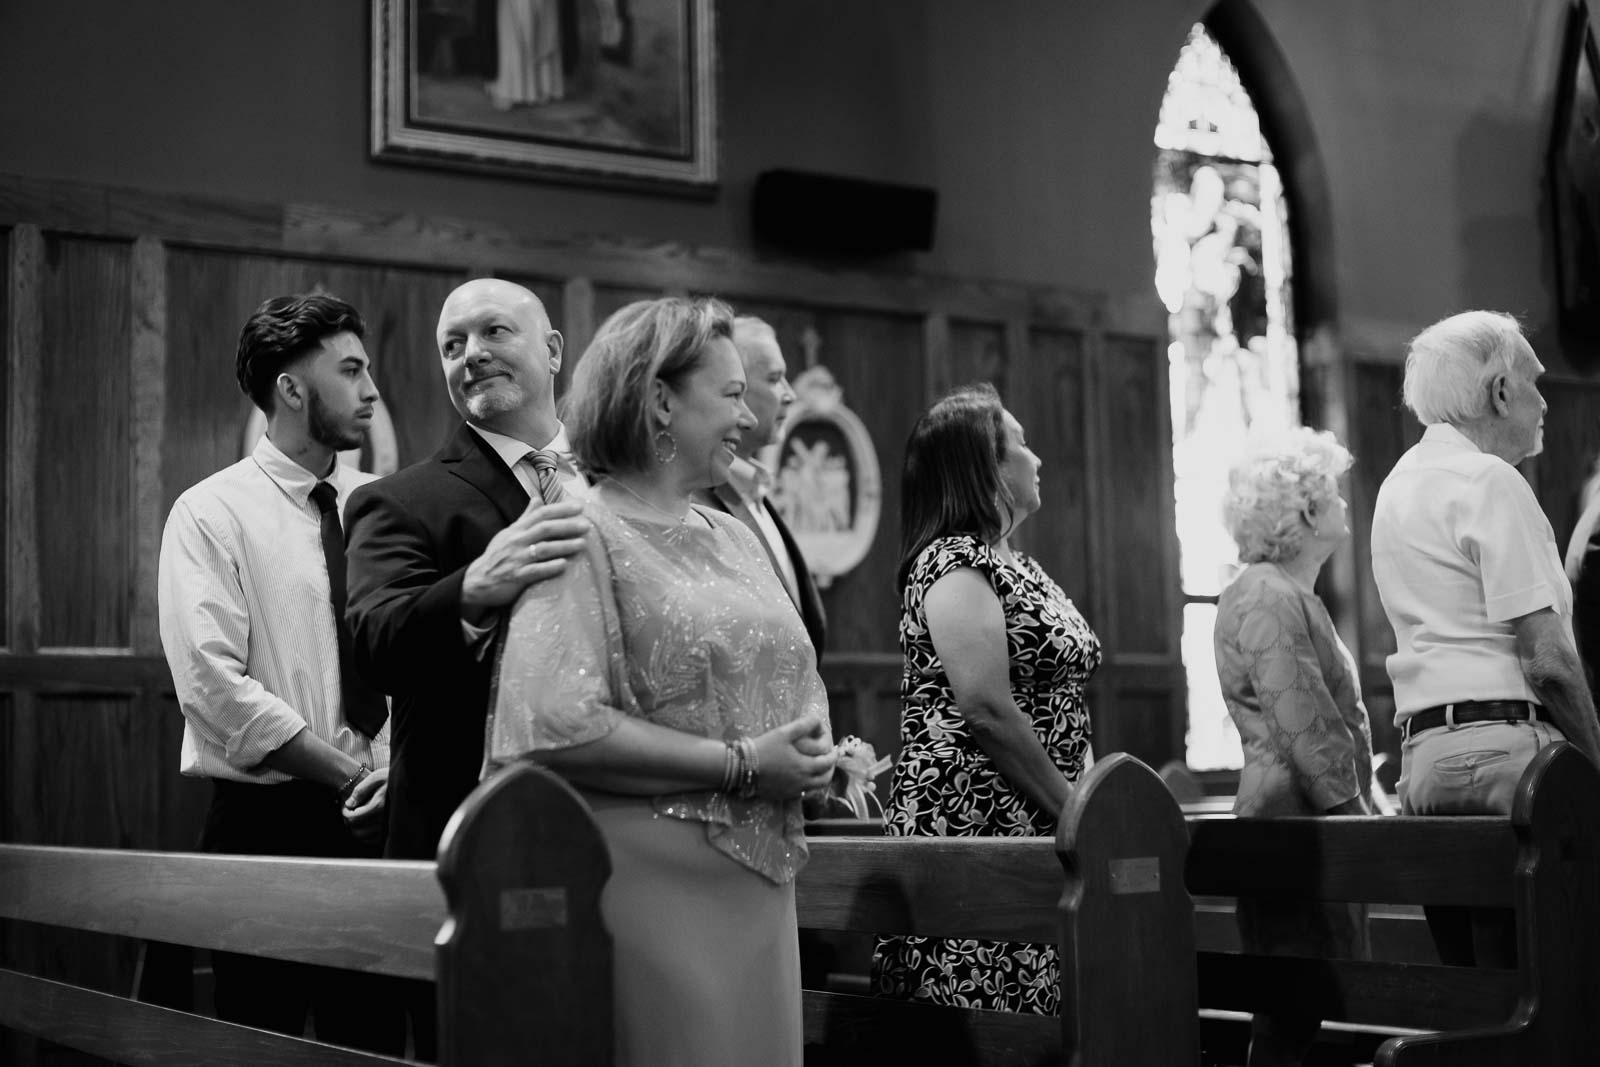 018 Our Lady of the Atonement Leica wedding photographer Philip Thomas Photography